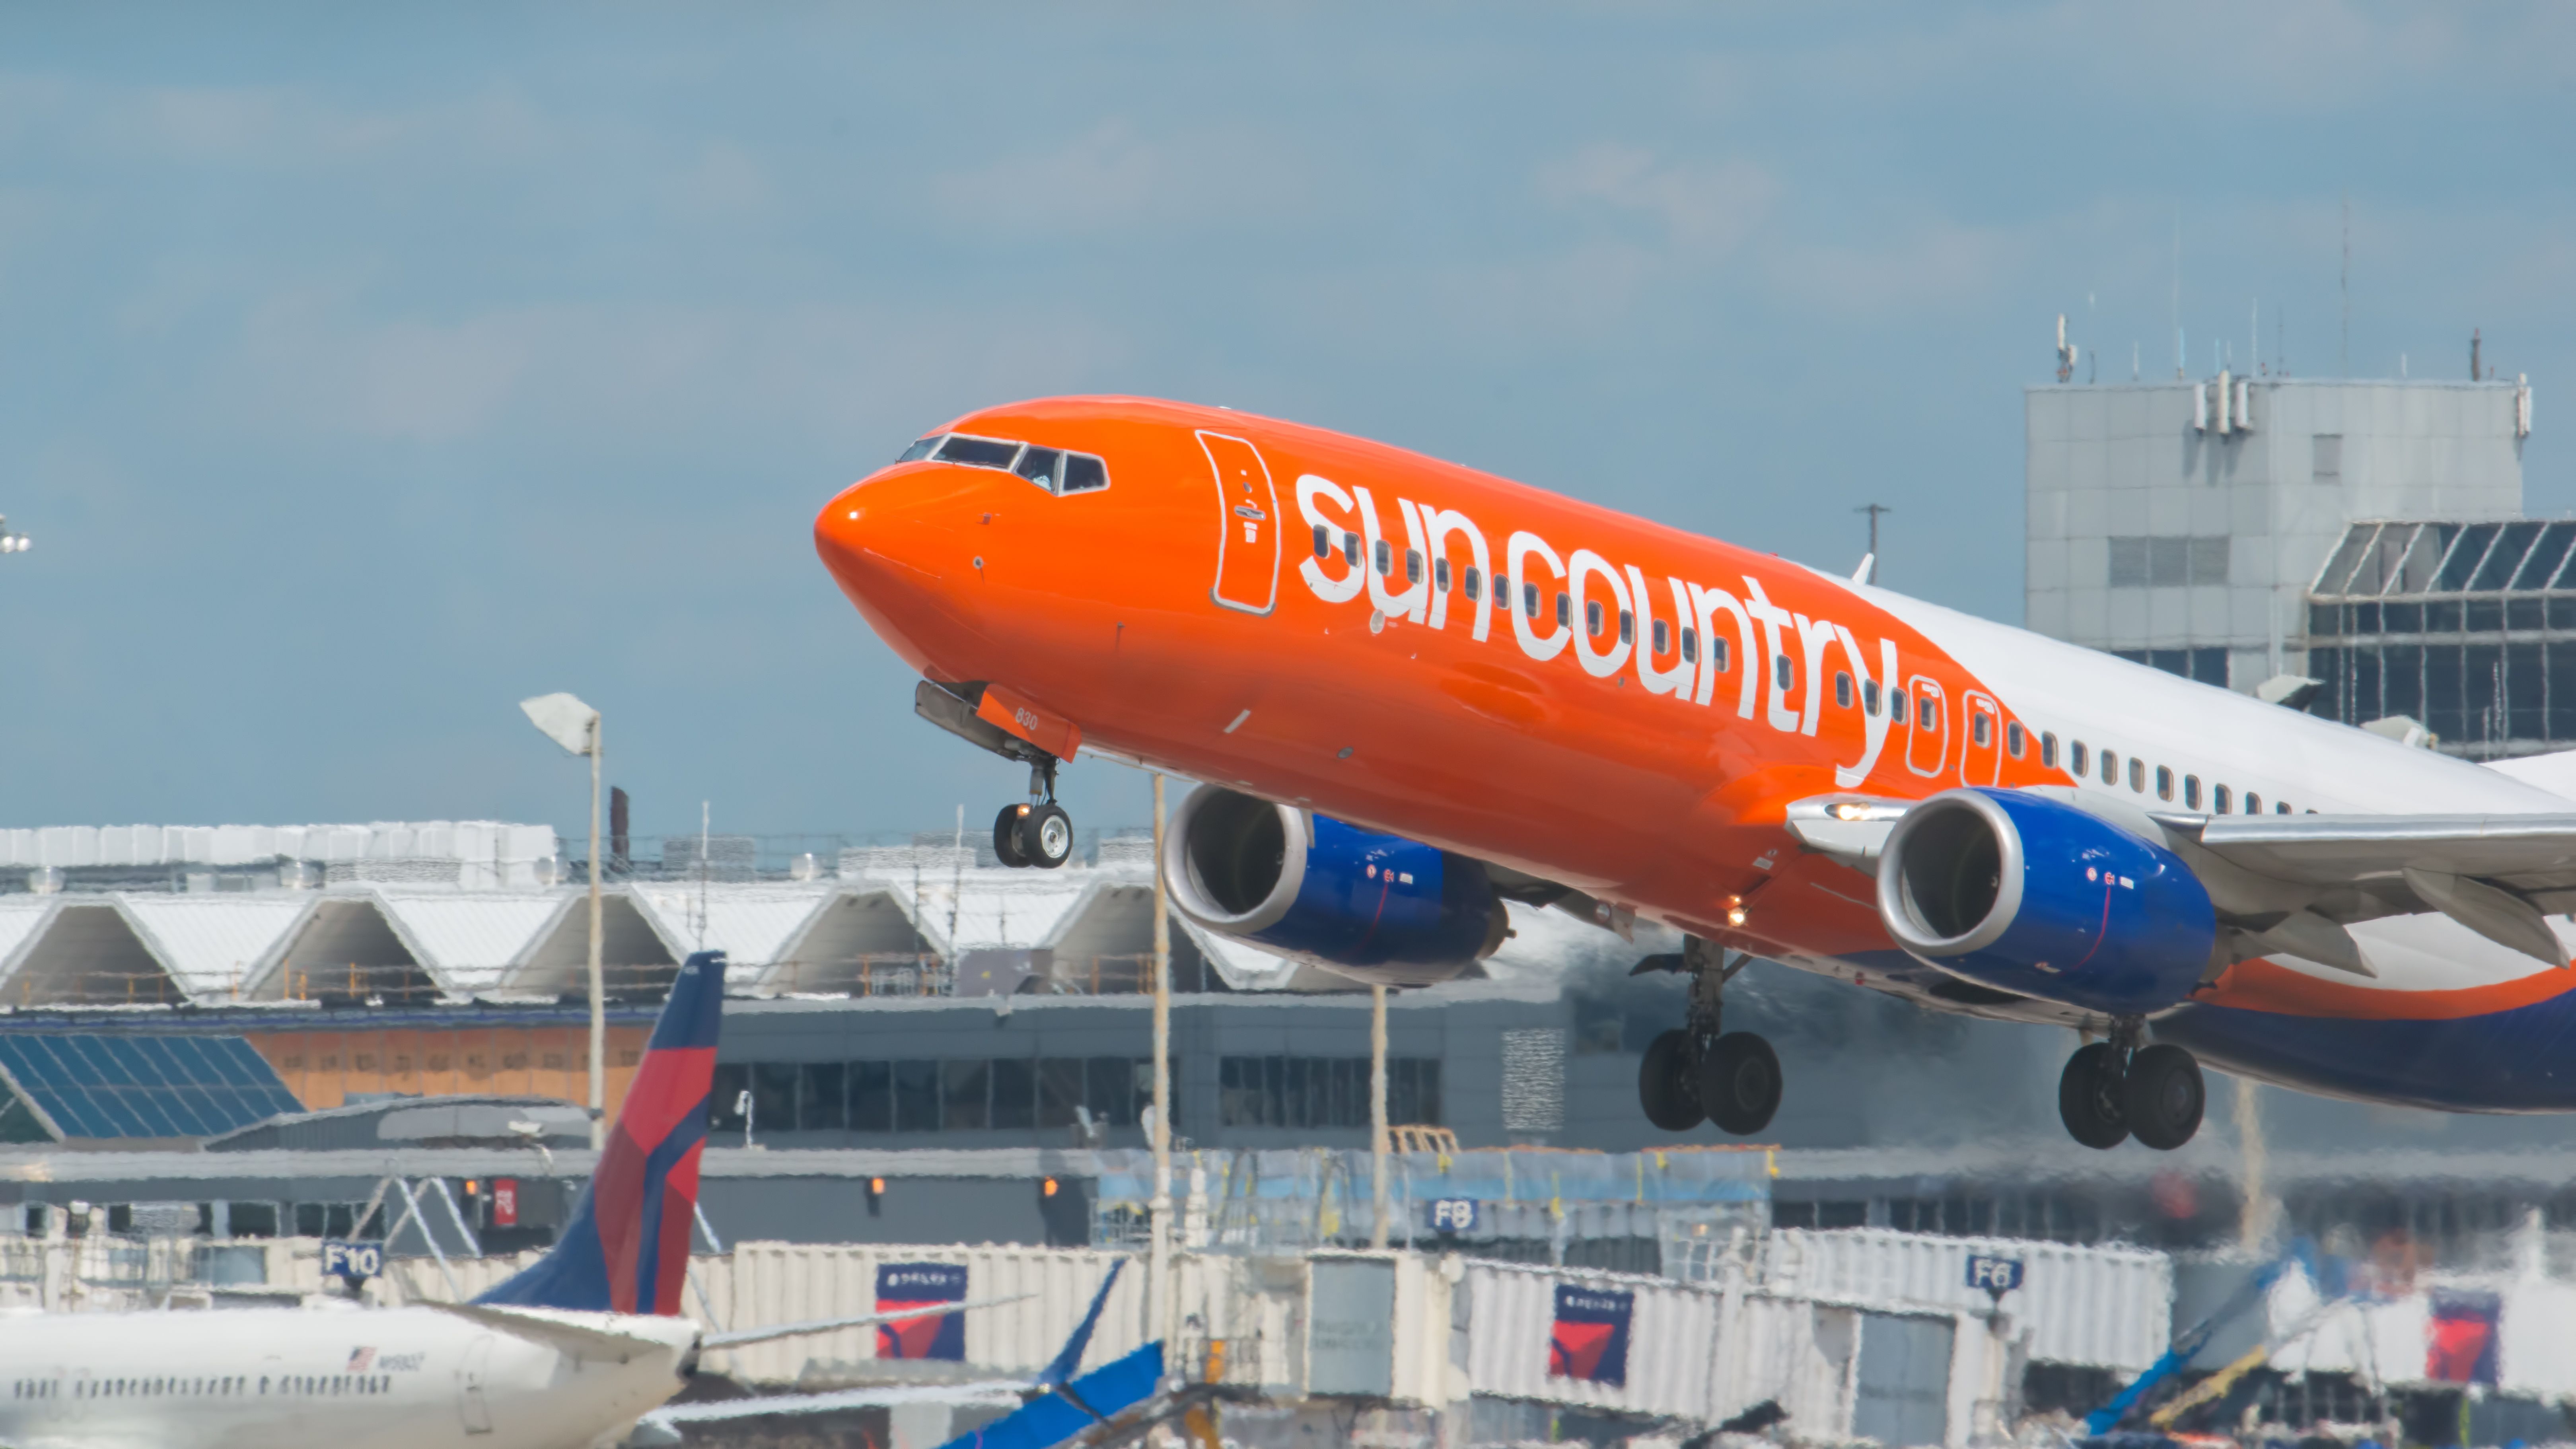 Sun Country Airlines Boeing 737 taking off.